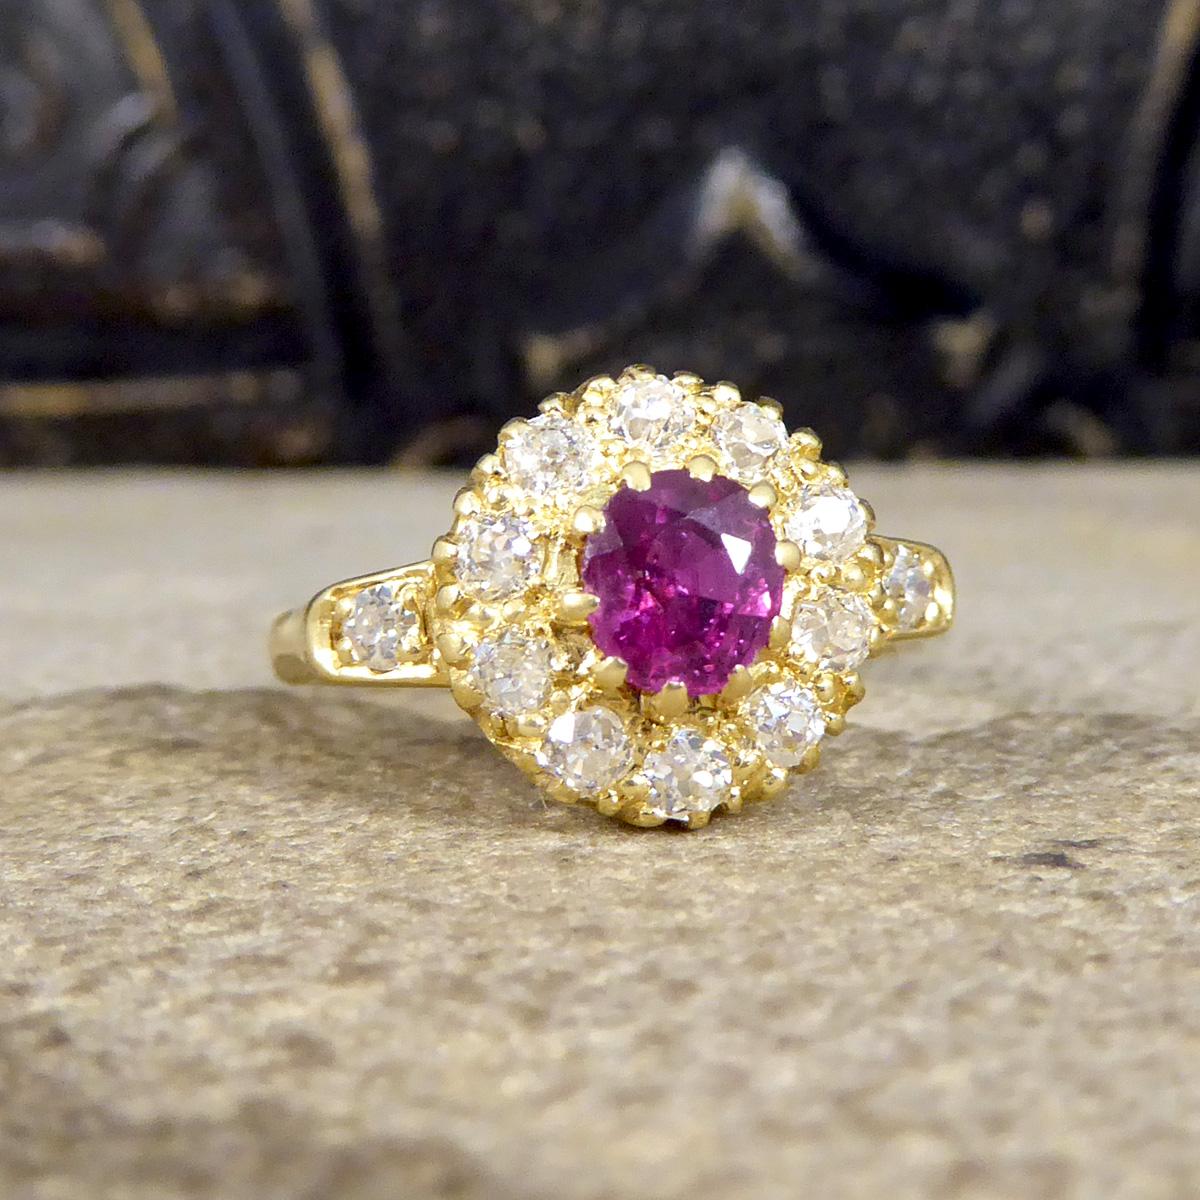 A classic Late Victorian designed ring crafted in C1880 featuring a Ruby in the centre weighing 0.41ct with small nibbles under one claw in keeping with the age of the piece. The rich and vibrant Ruby has a surround of Old Chunky European Cut